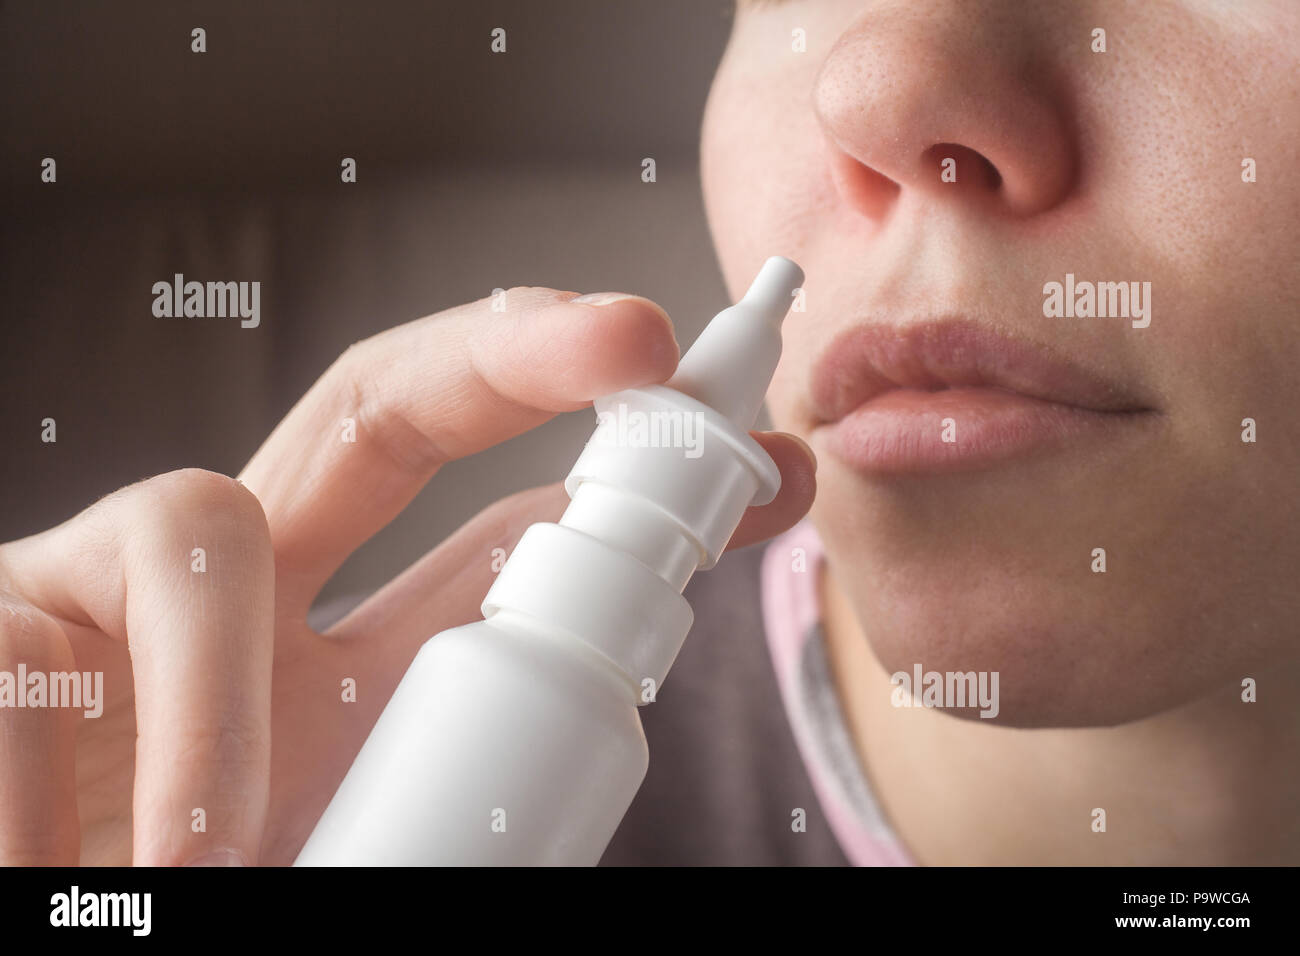 A woman with a runny nose holds a medicine in her hand, a red no Stock Photo